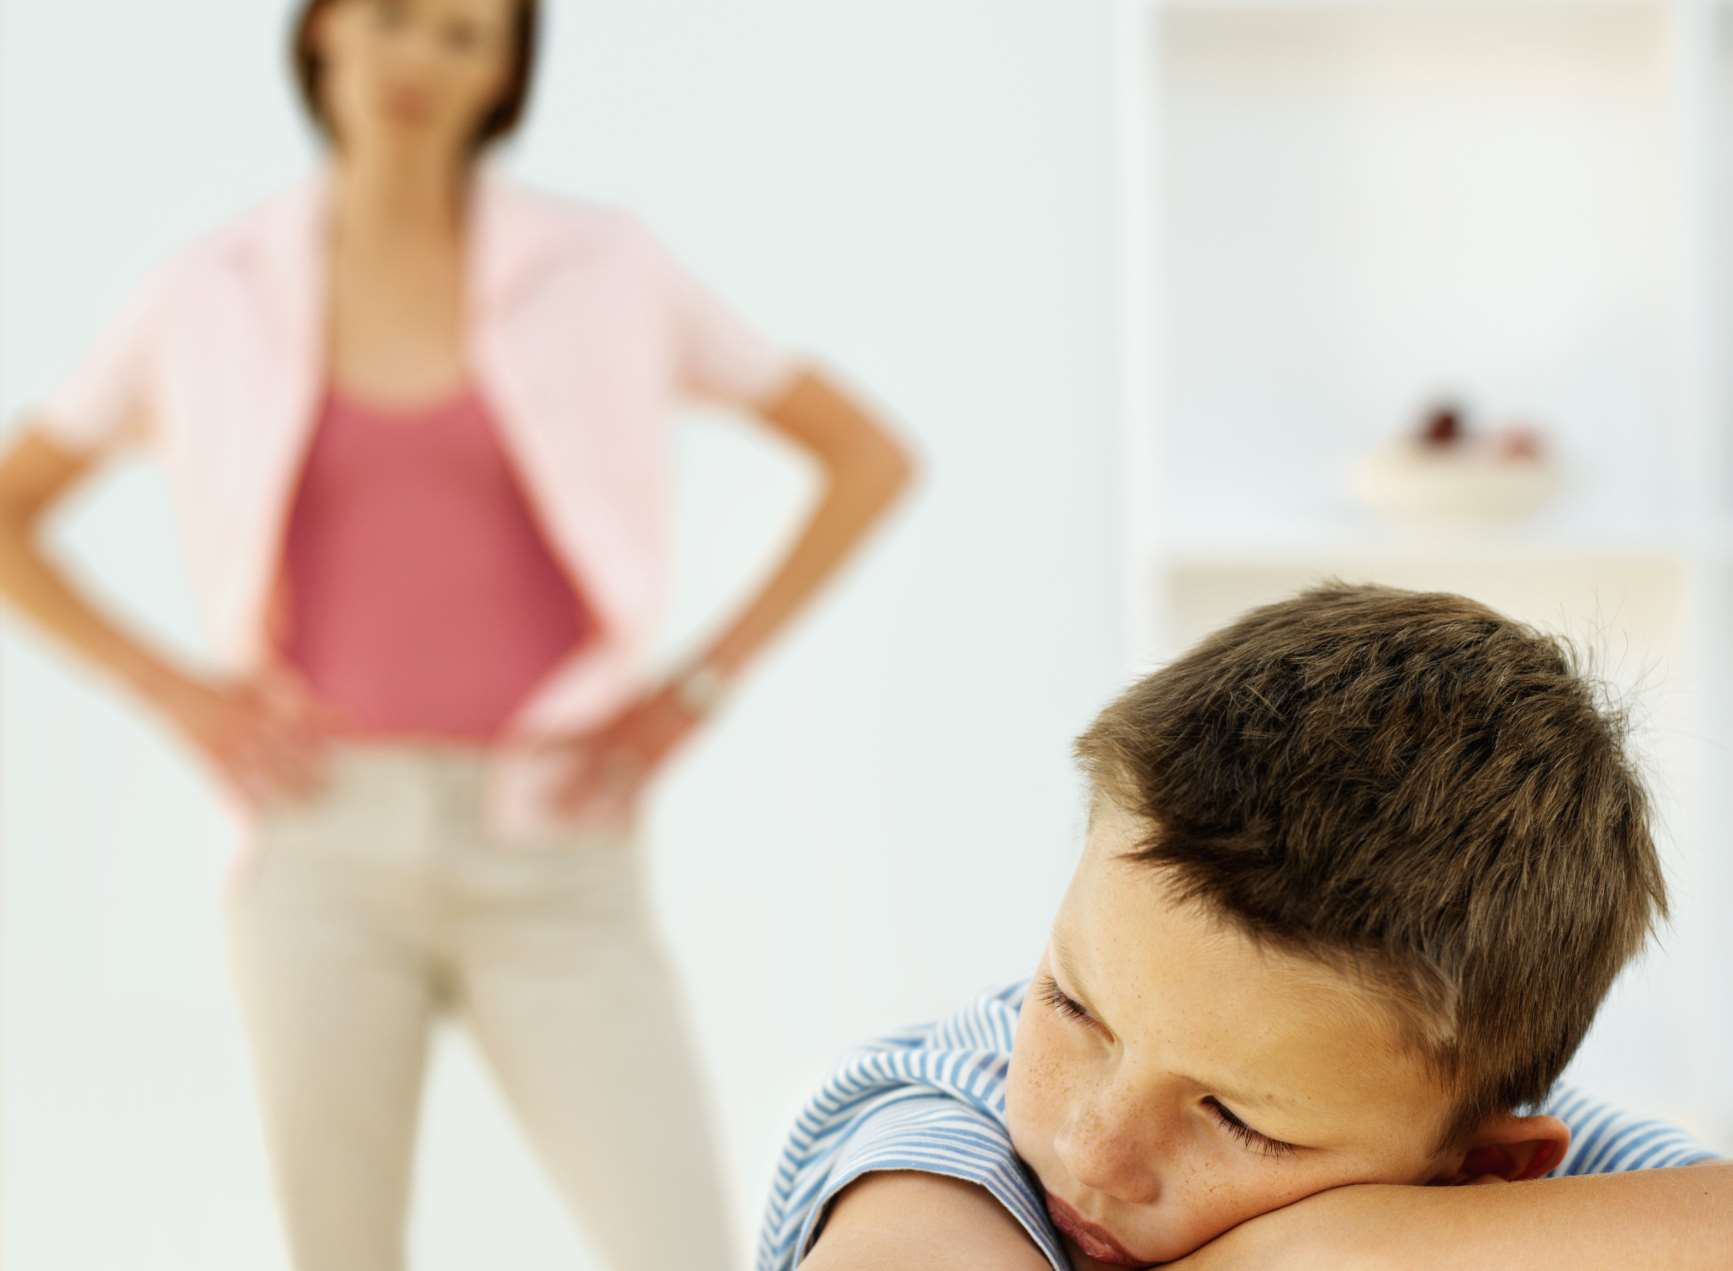 'Parents should avoid using threats if they want their children to cooperate'